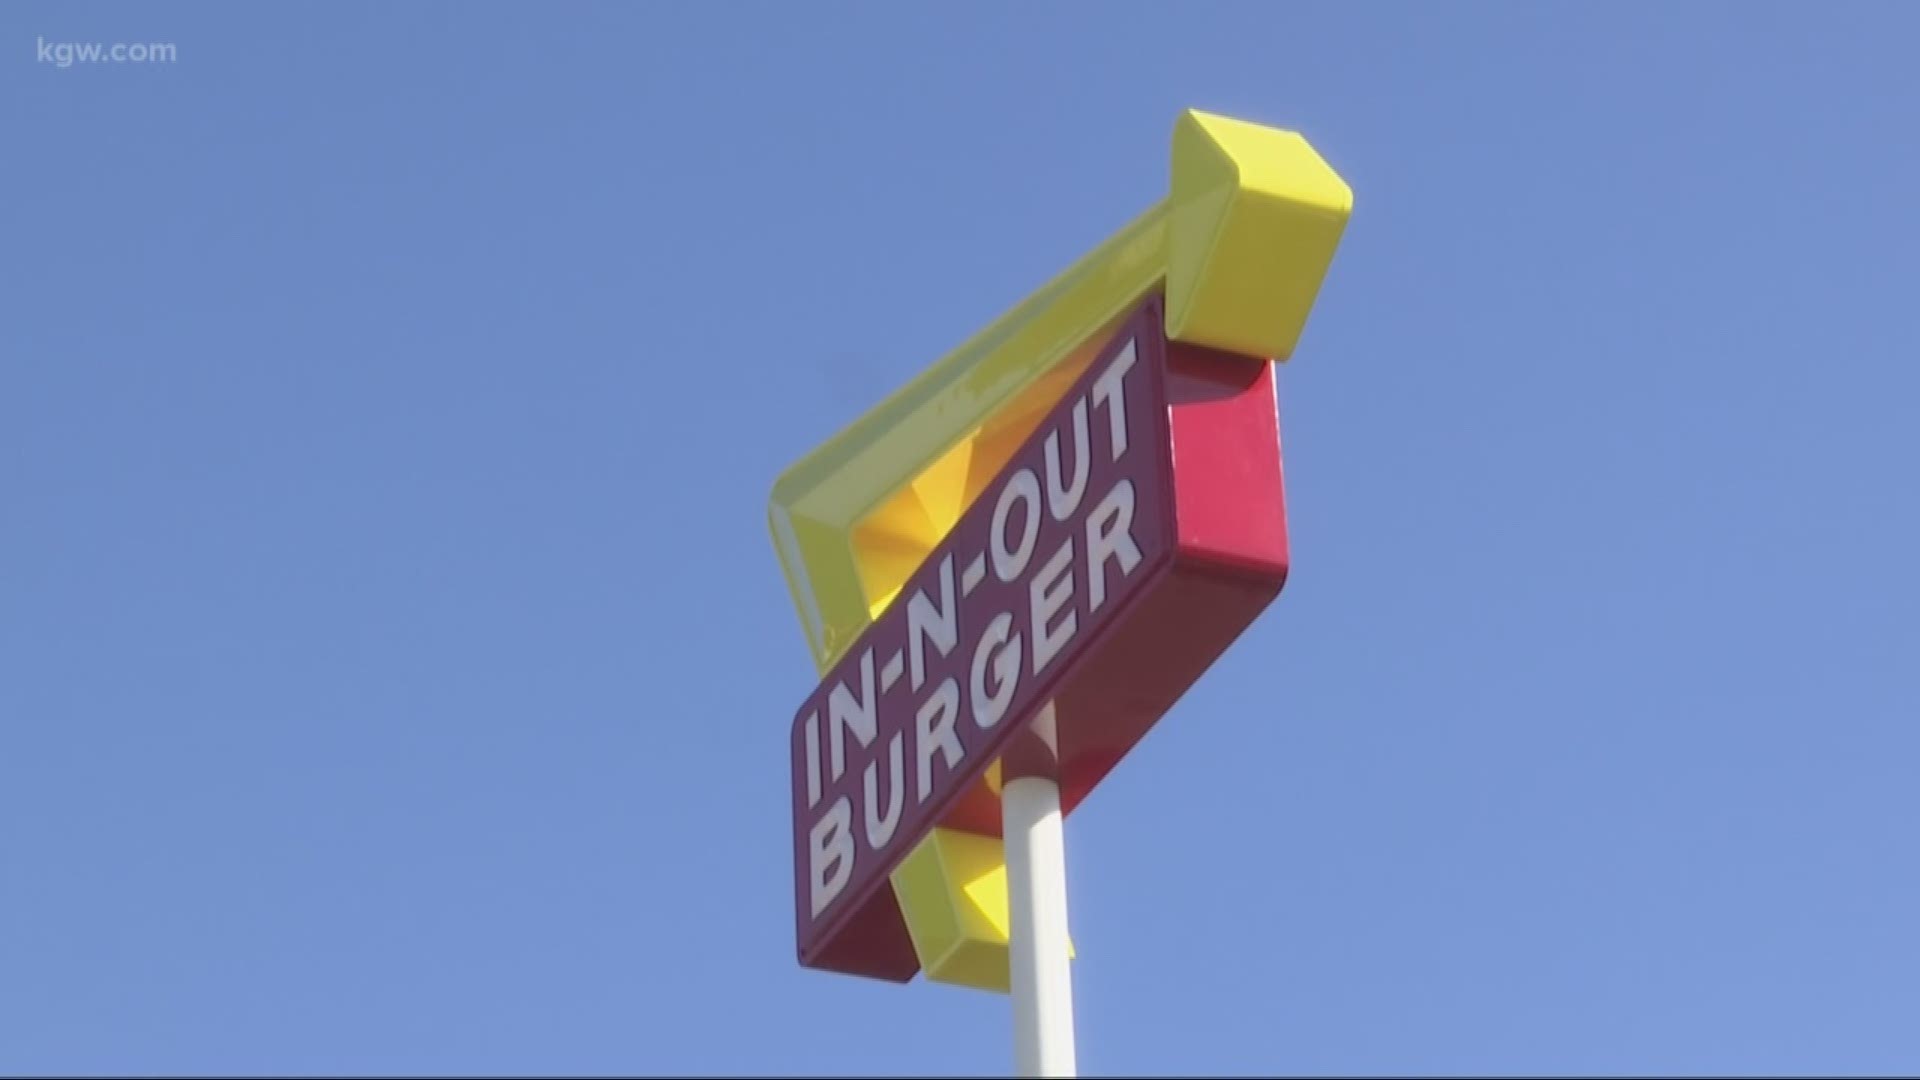 In-N-Out Burger is set to open a location at Keizer Station, according to Keizer Mayor Cathy Clark.